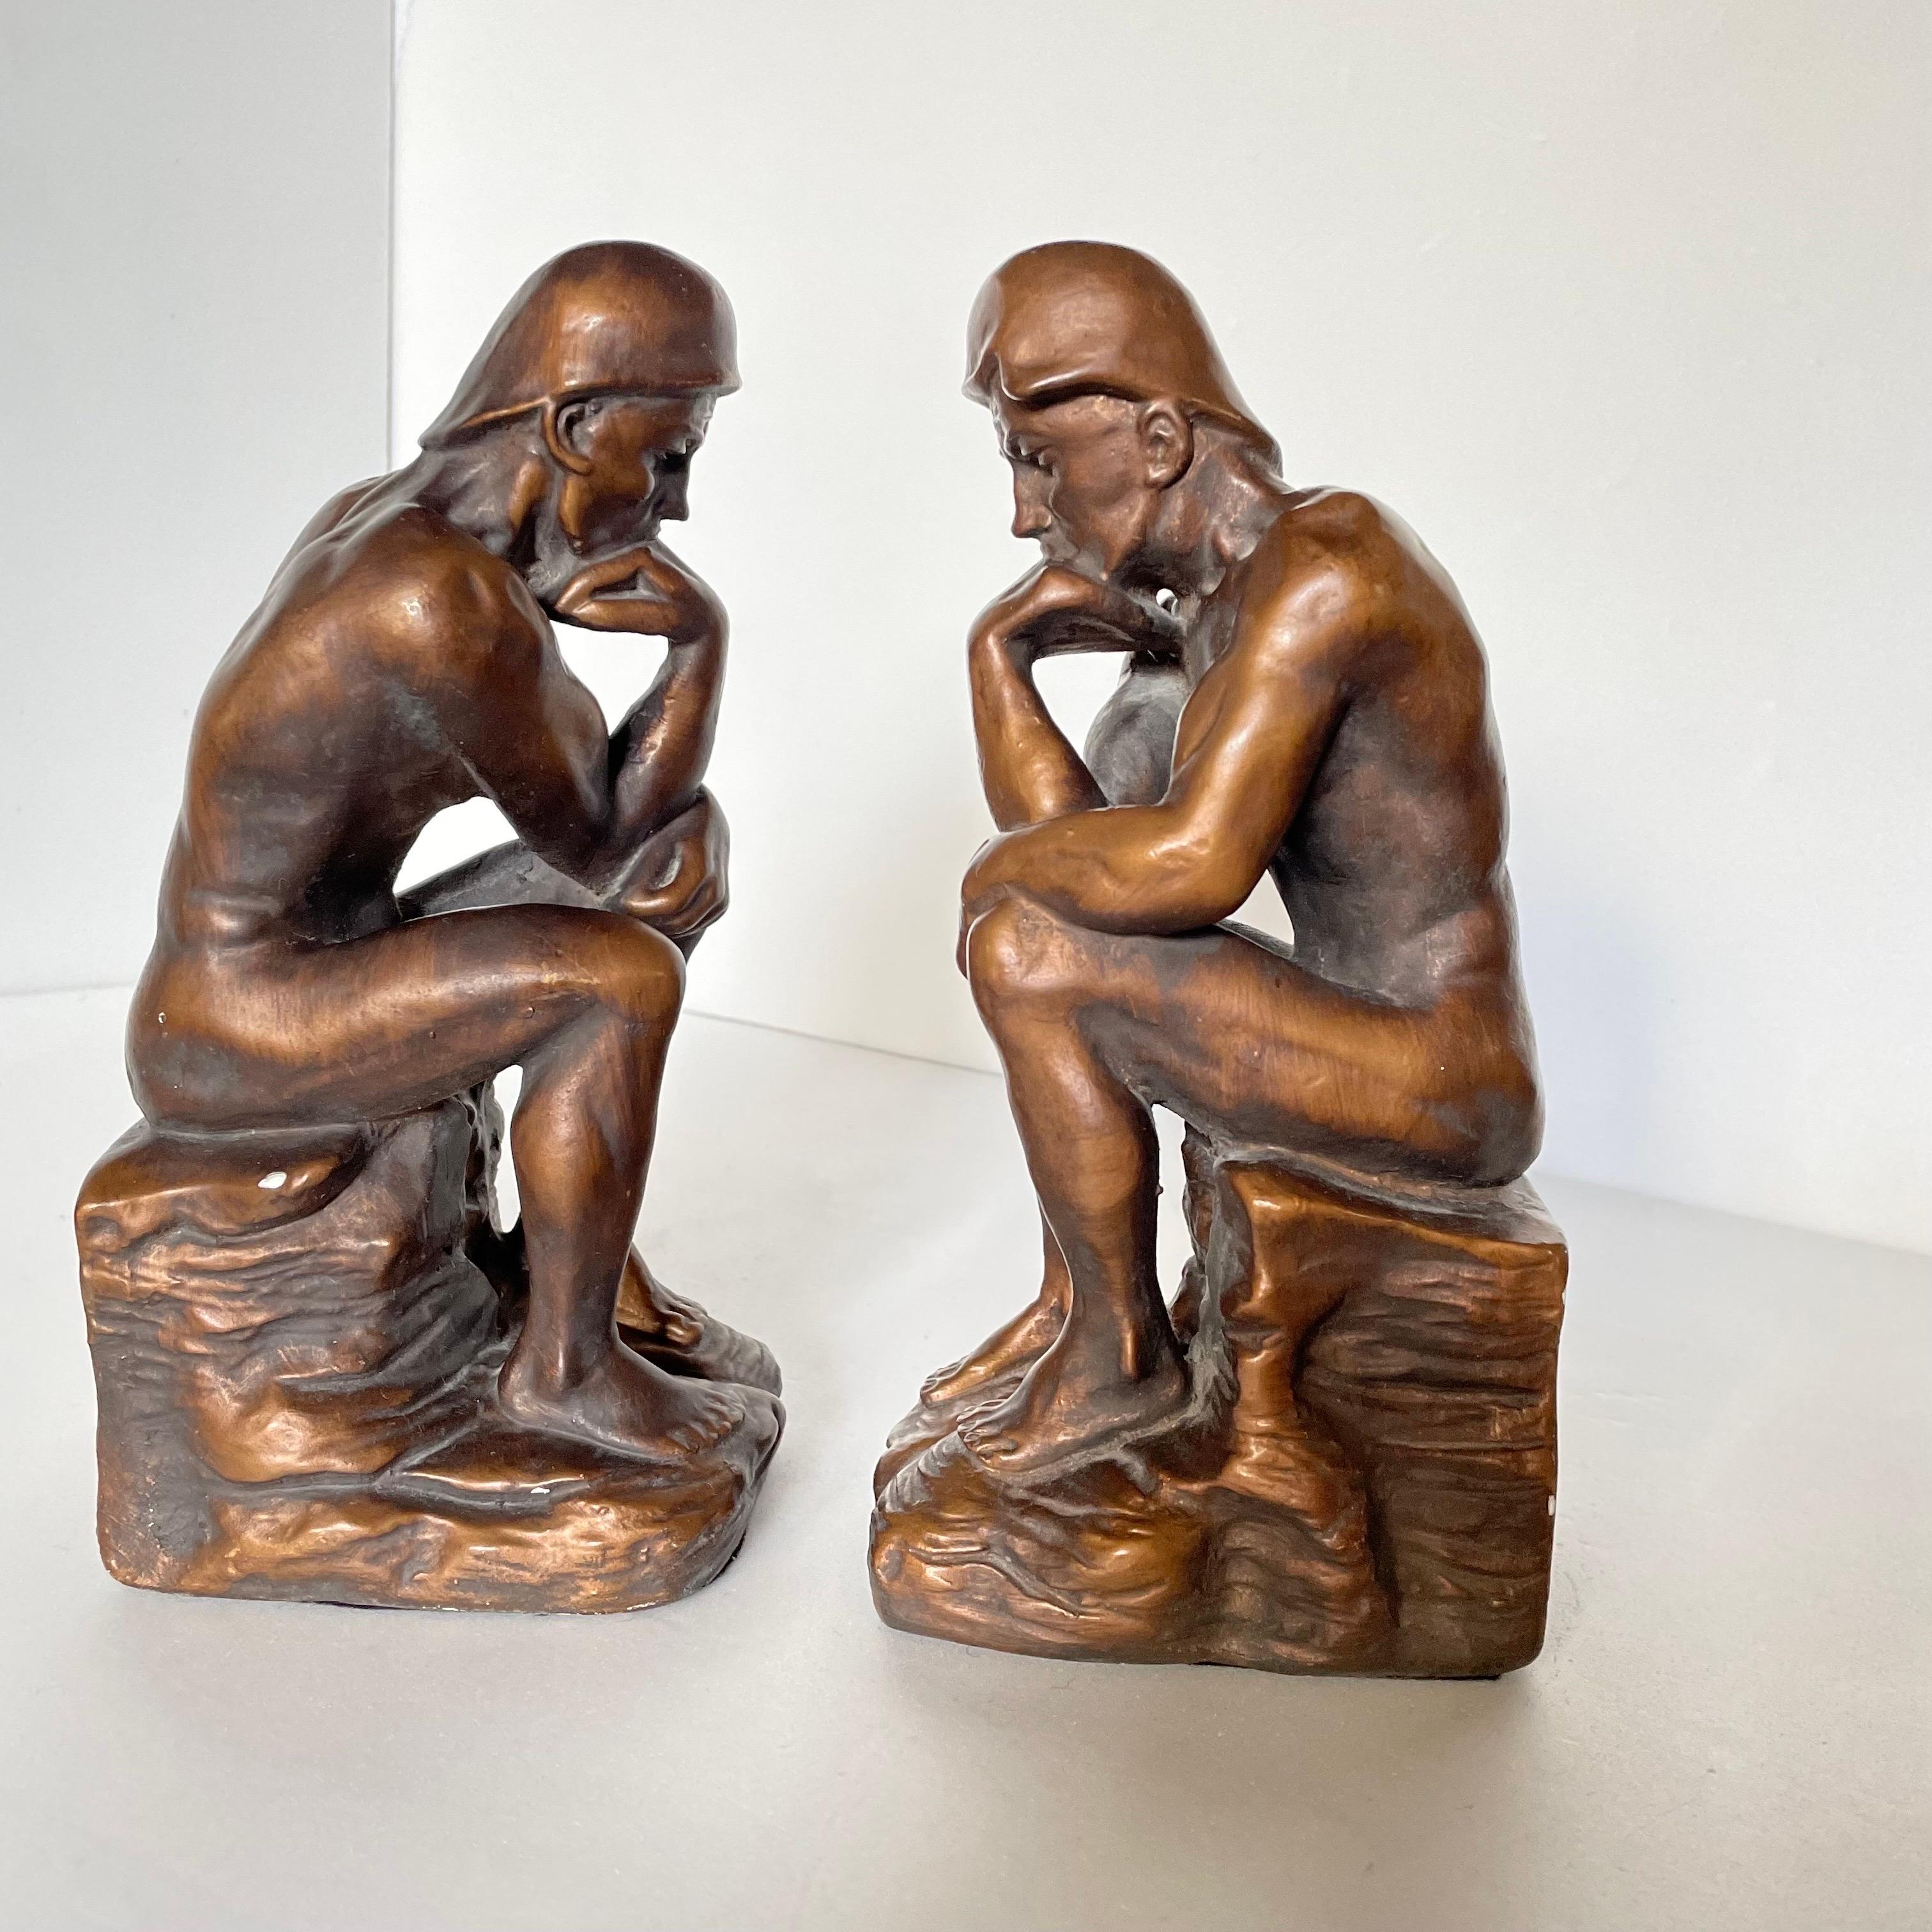 Art Deco Pair of Antique Male Nude Figural Bookends - the Thinker, 1960s For Sale